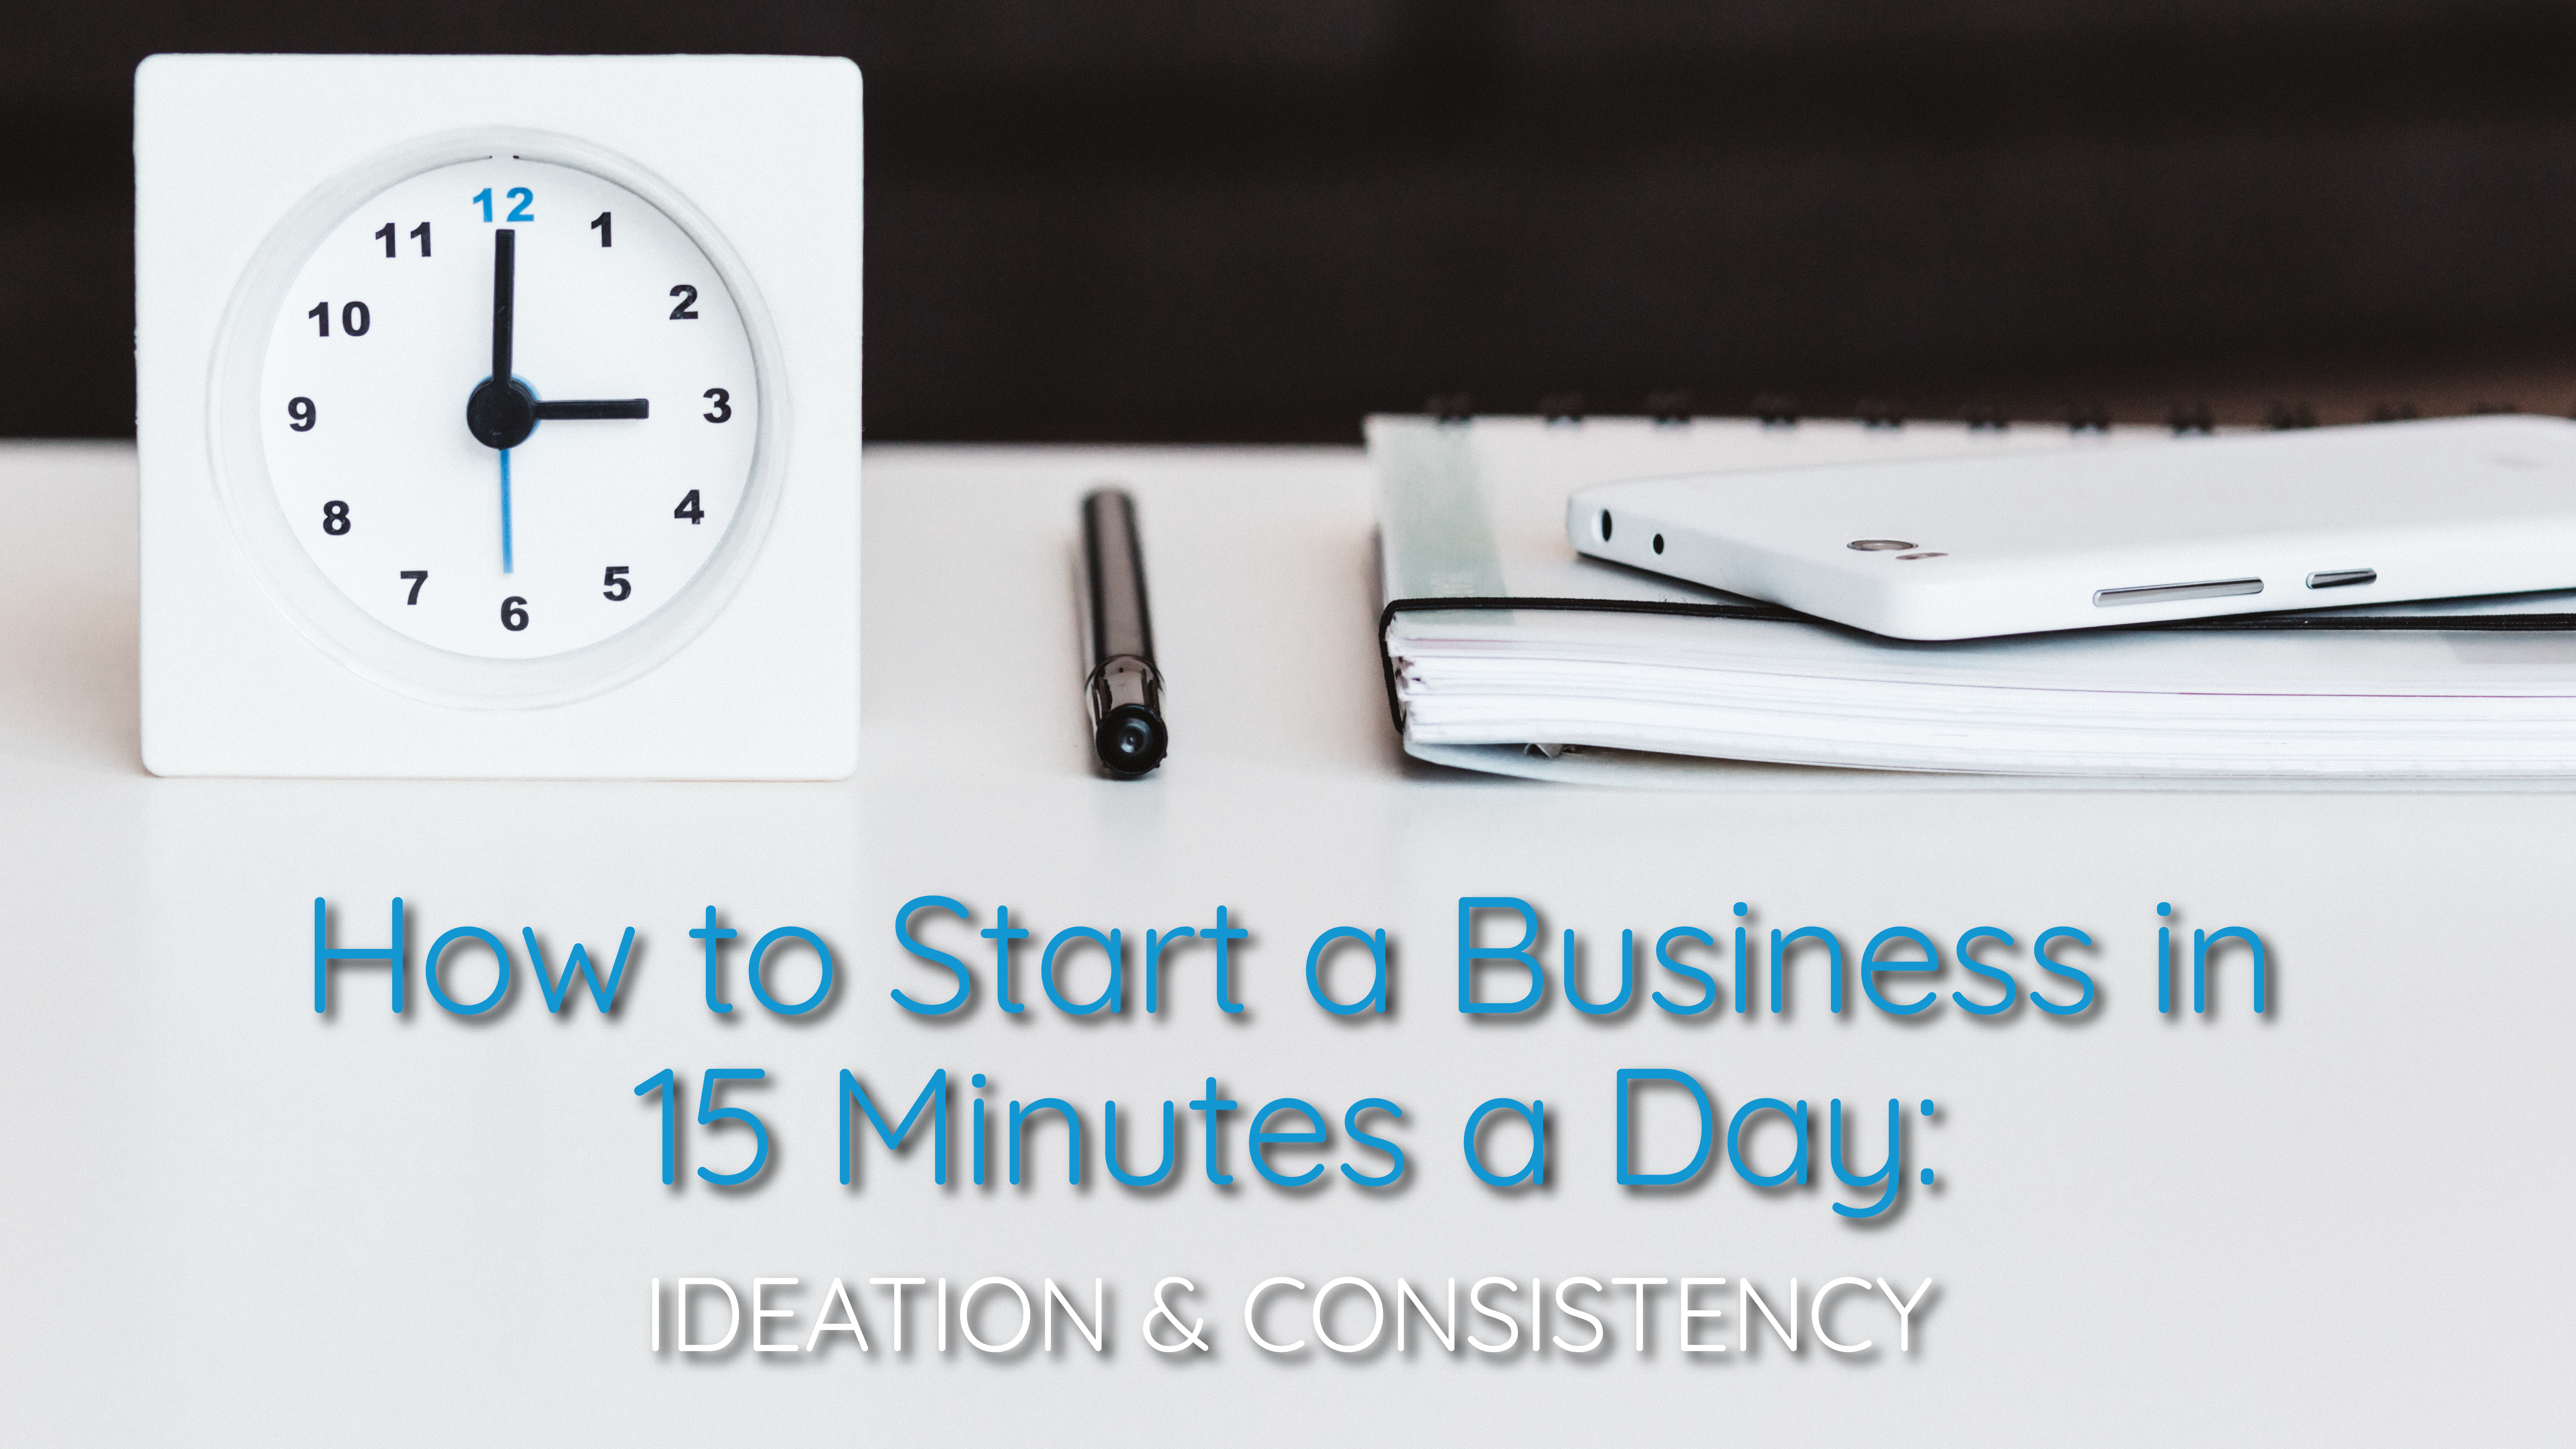 How To Start a Business in 15 Minutes